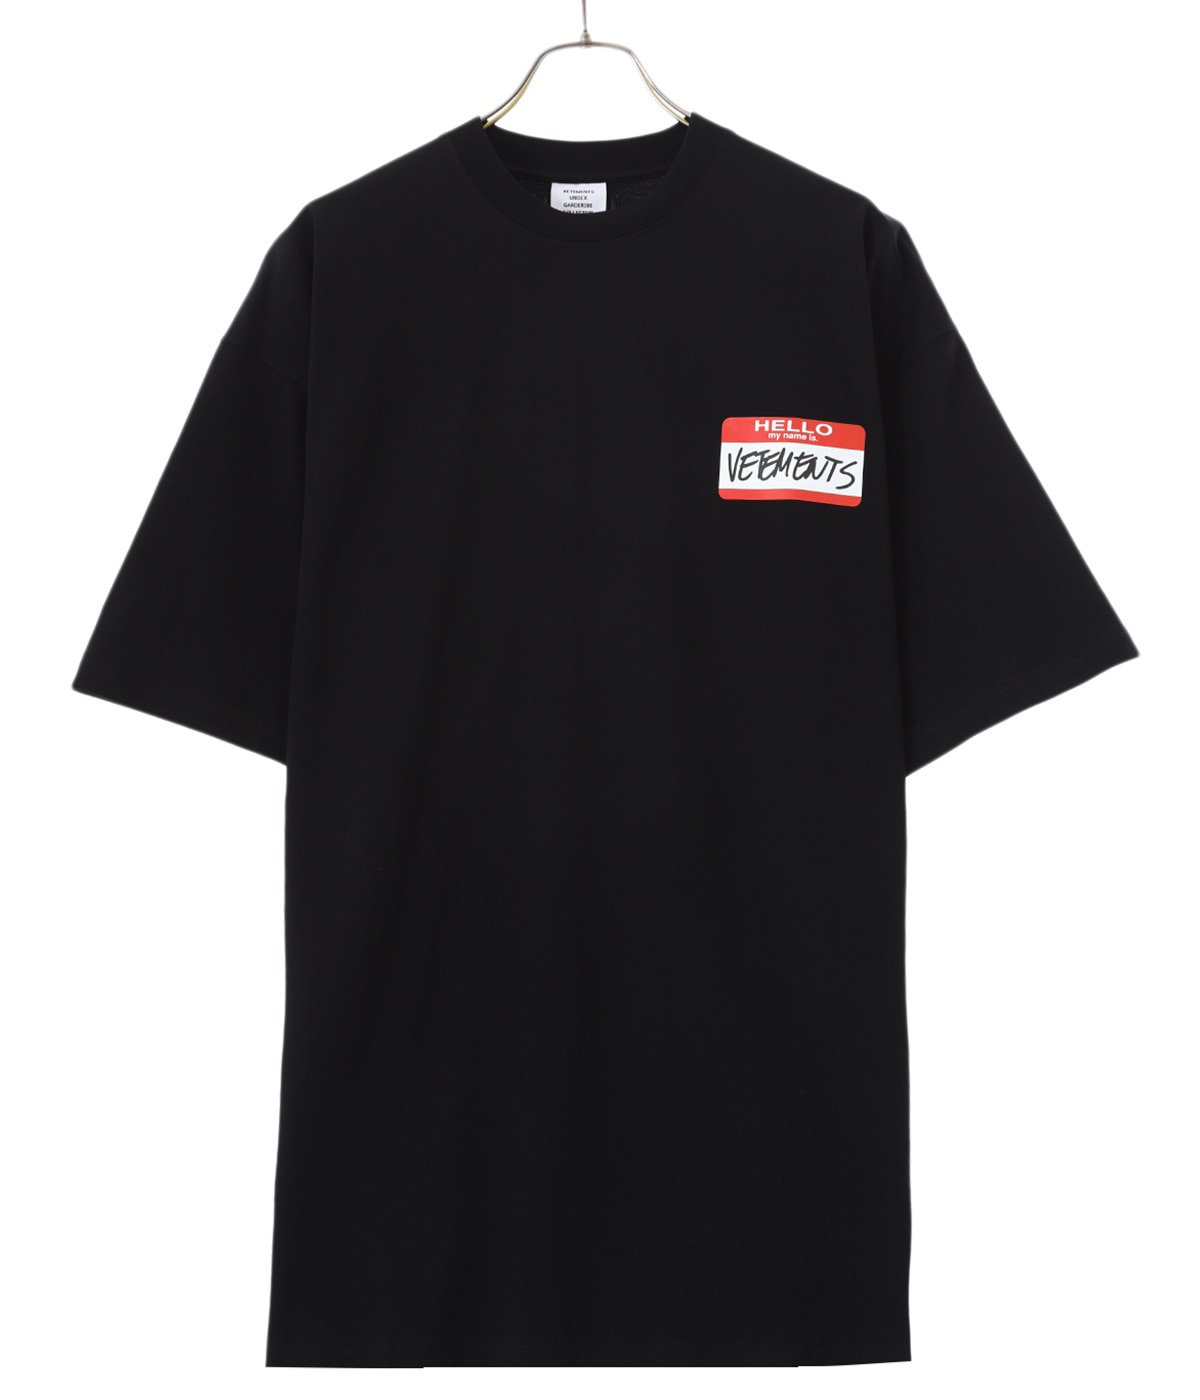 MY NAME IS VETEMENTS T-SHIRT